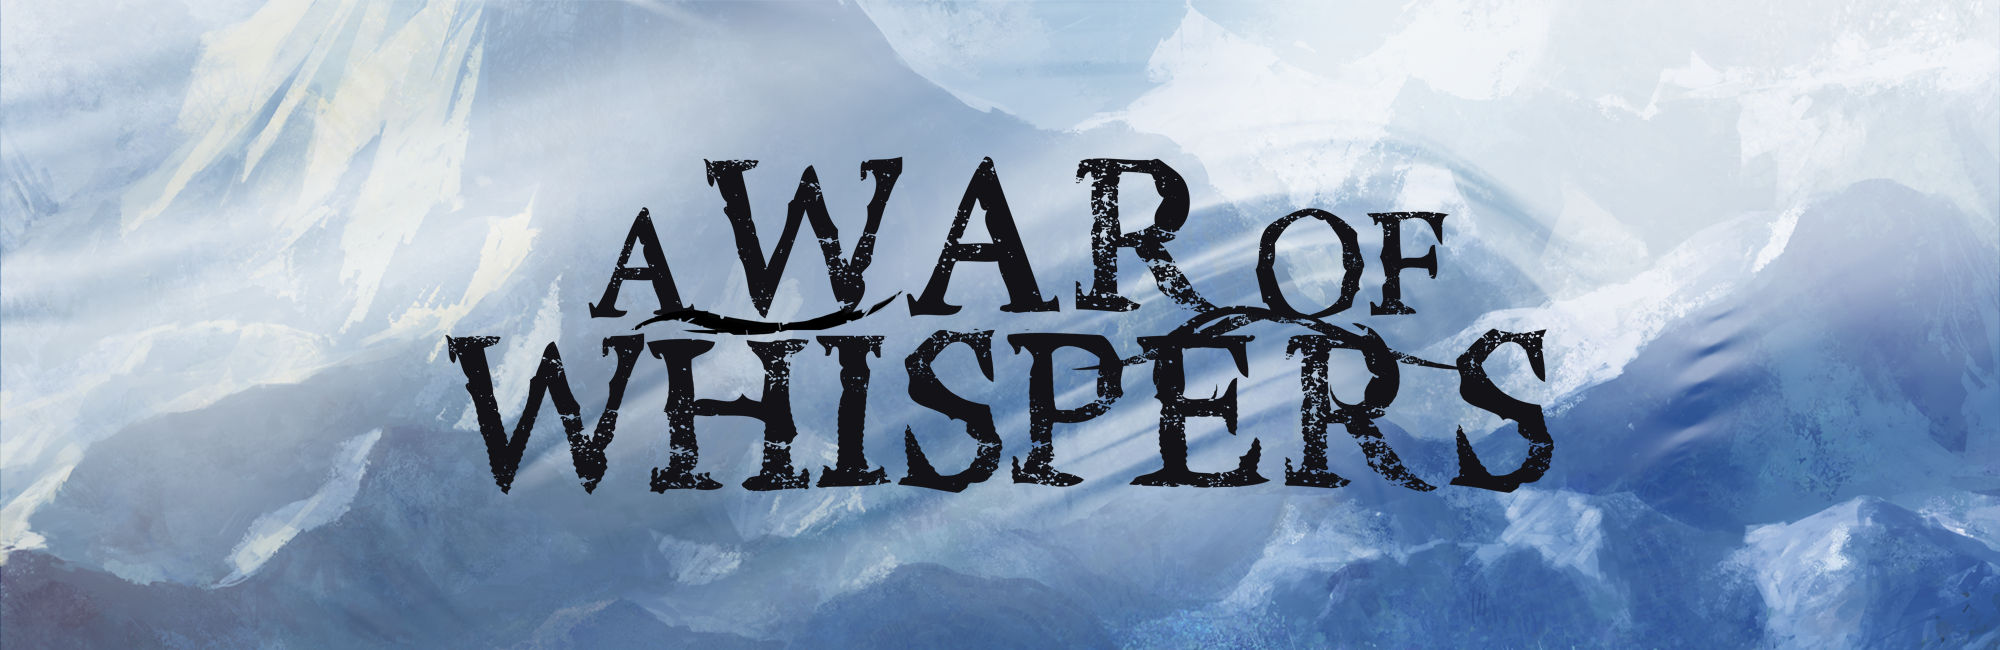 A War of Whispers tabletop game